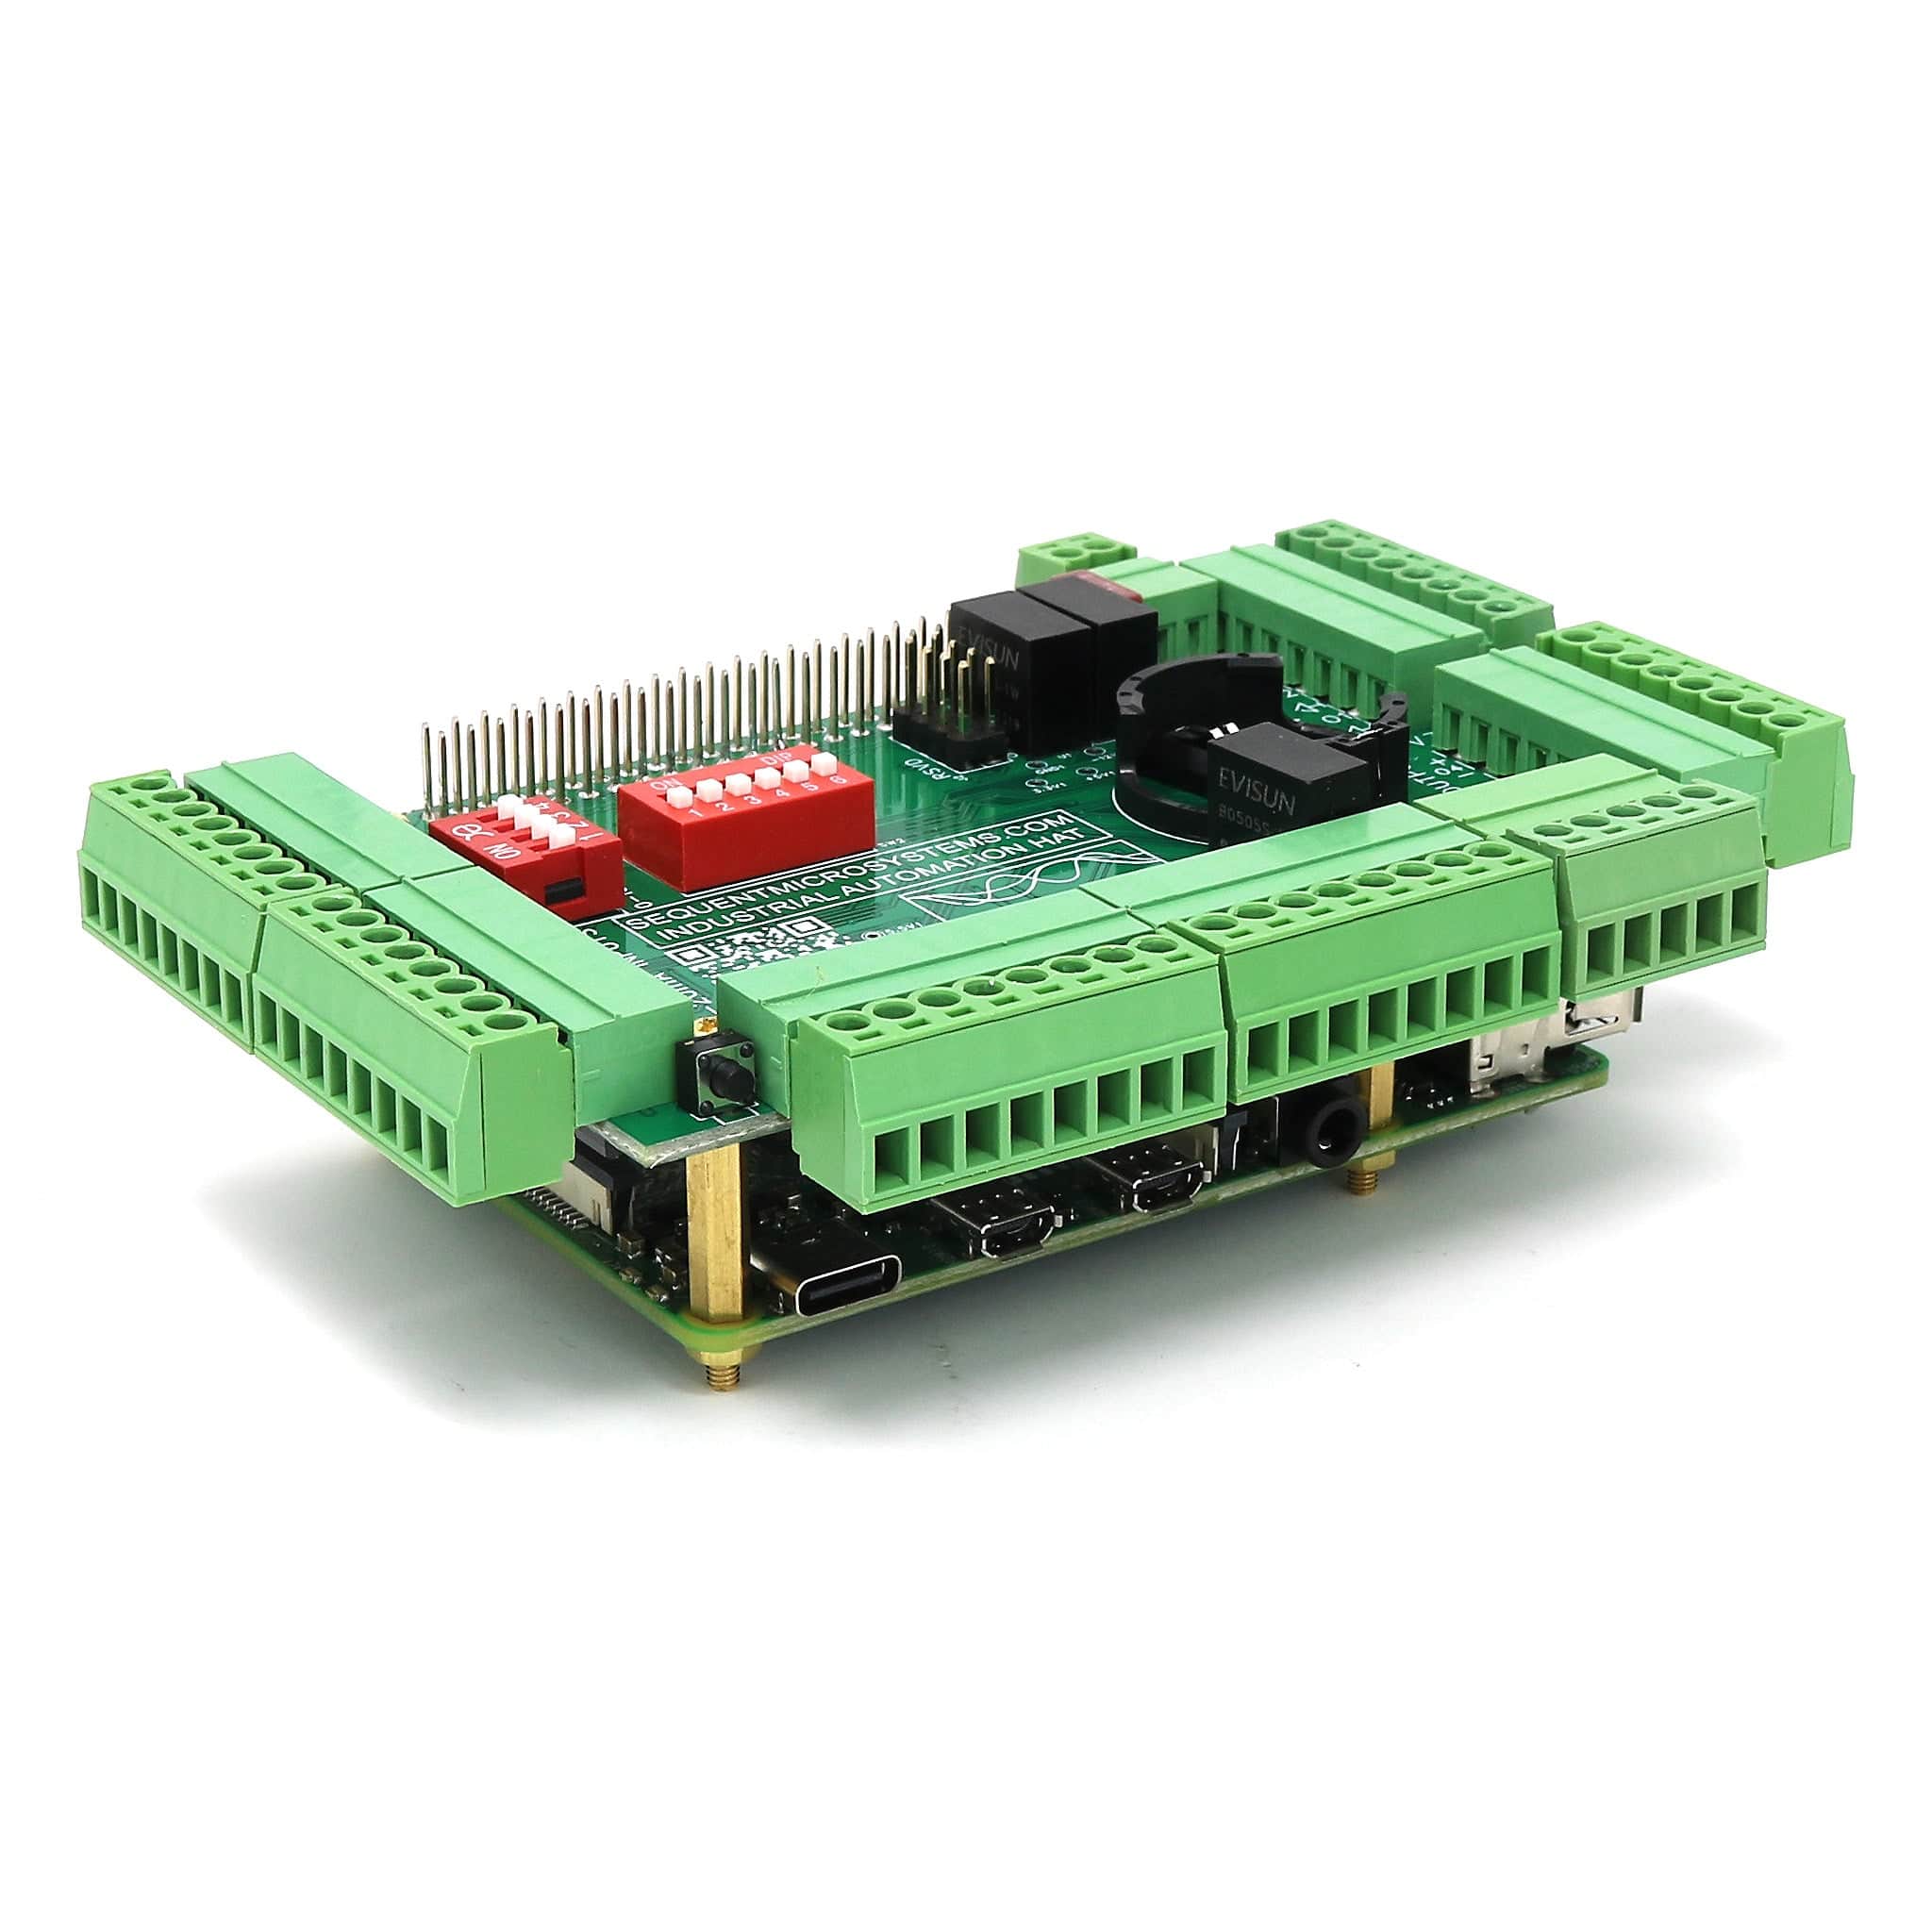 Industrial Automation Stackable Card for Raspberry Pi - The Pi Hut